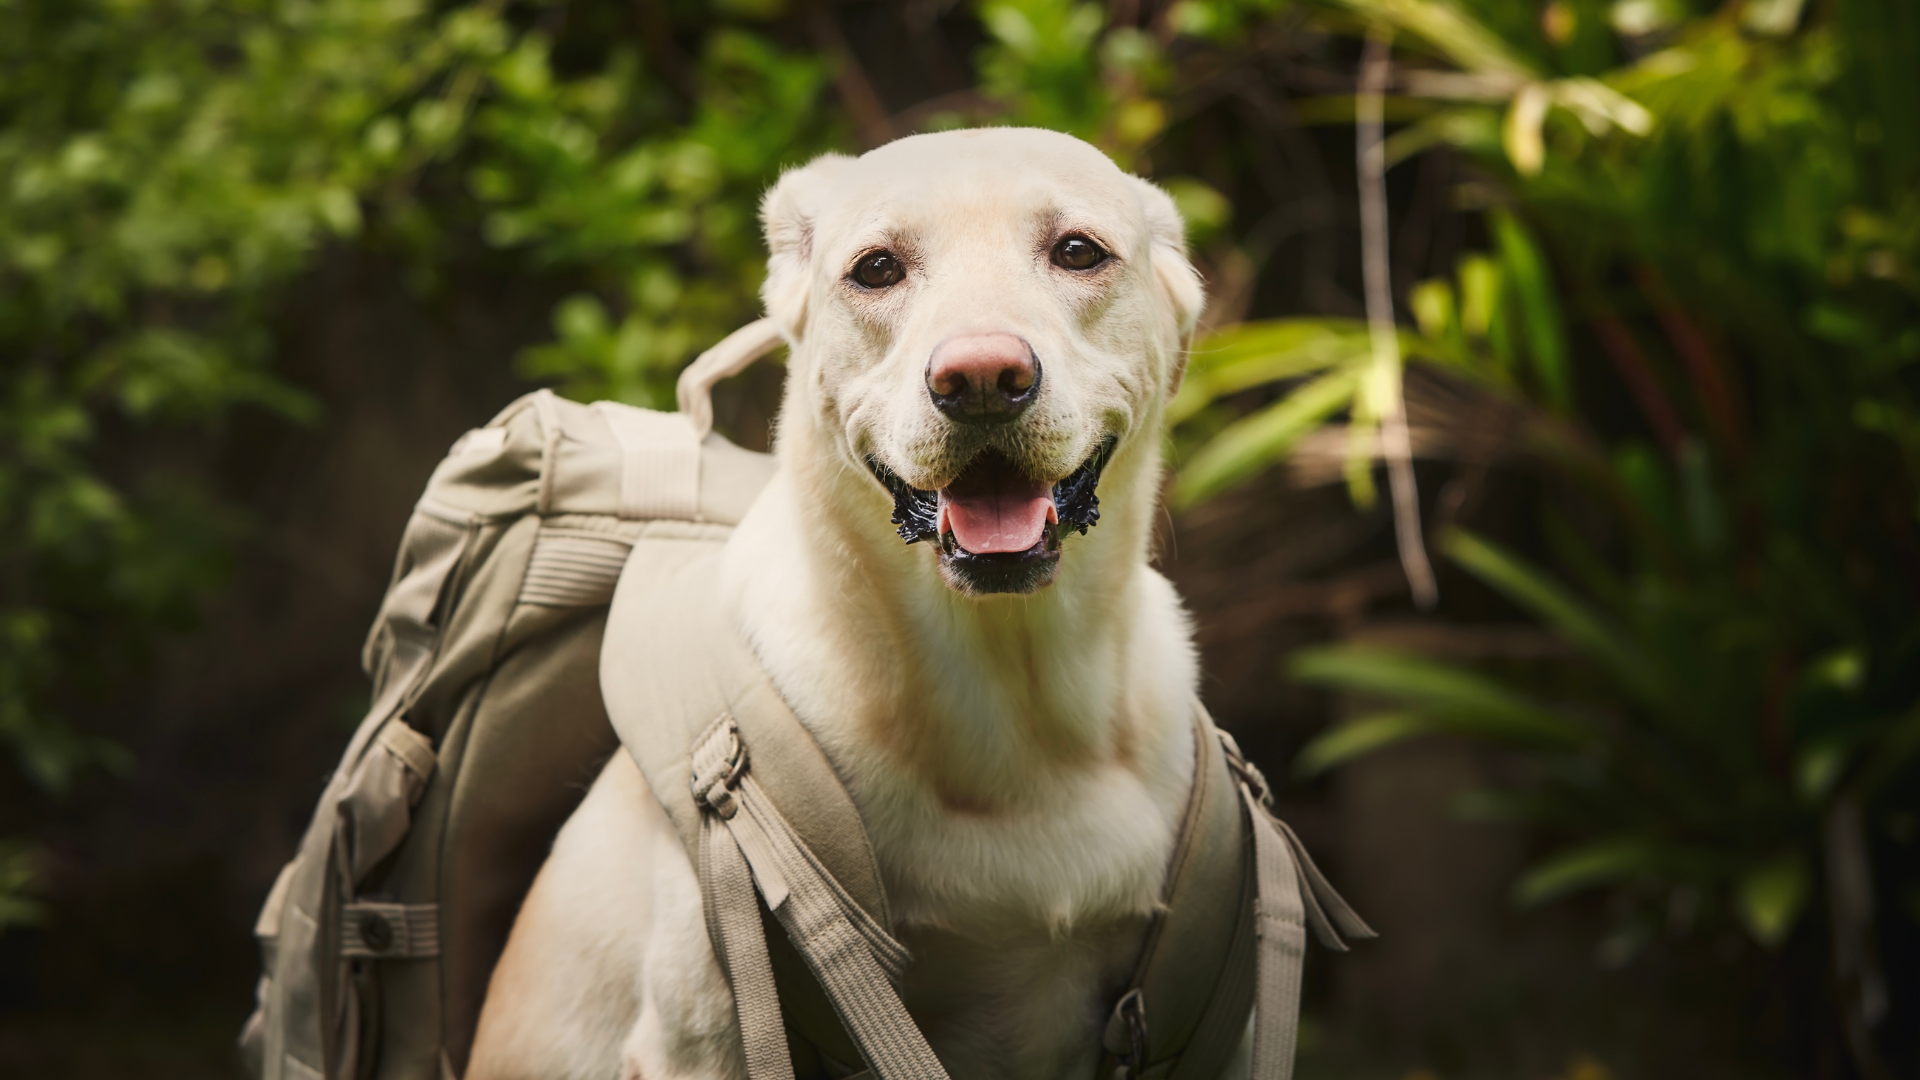 Planning a Multi-Day Hike with Your Dog